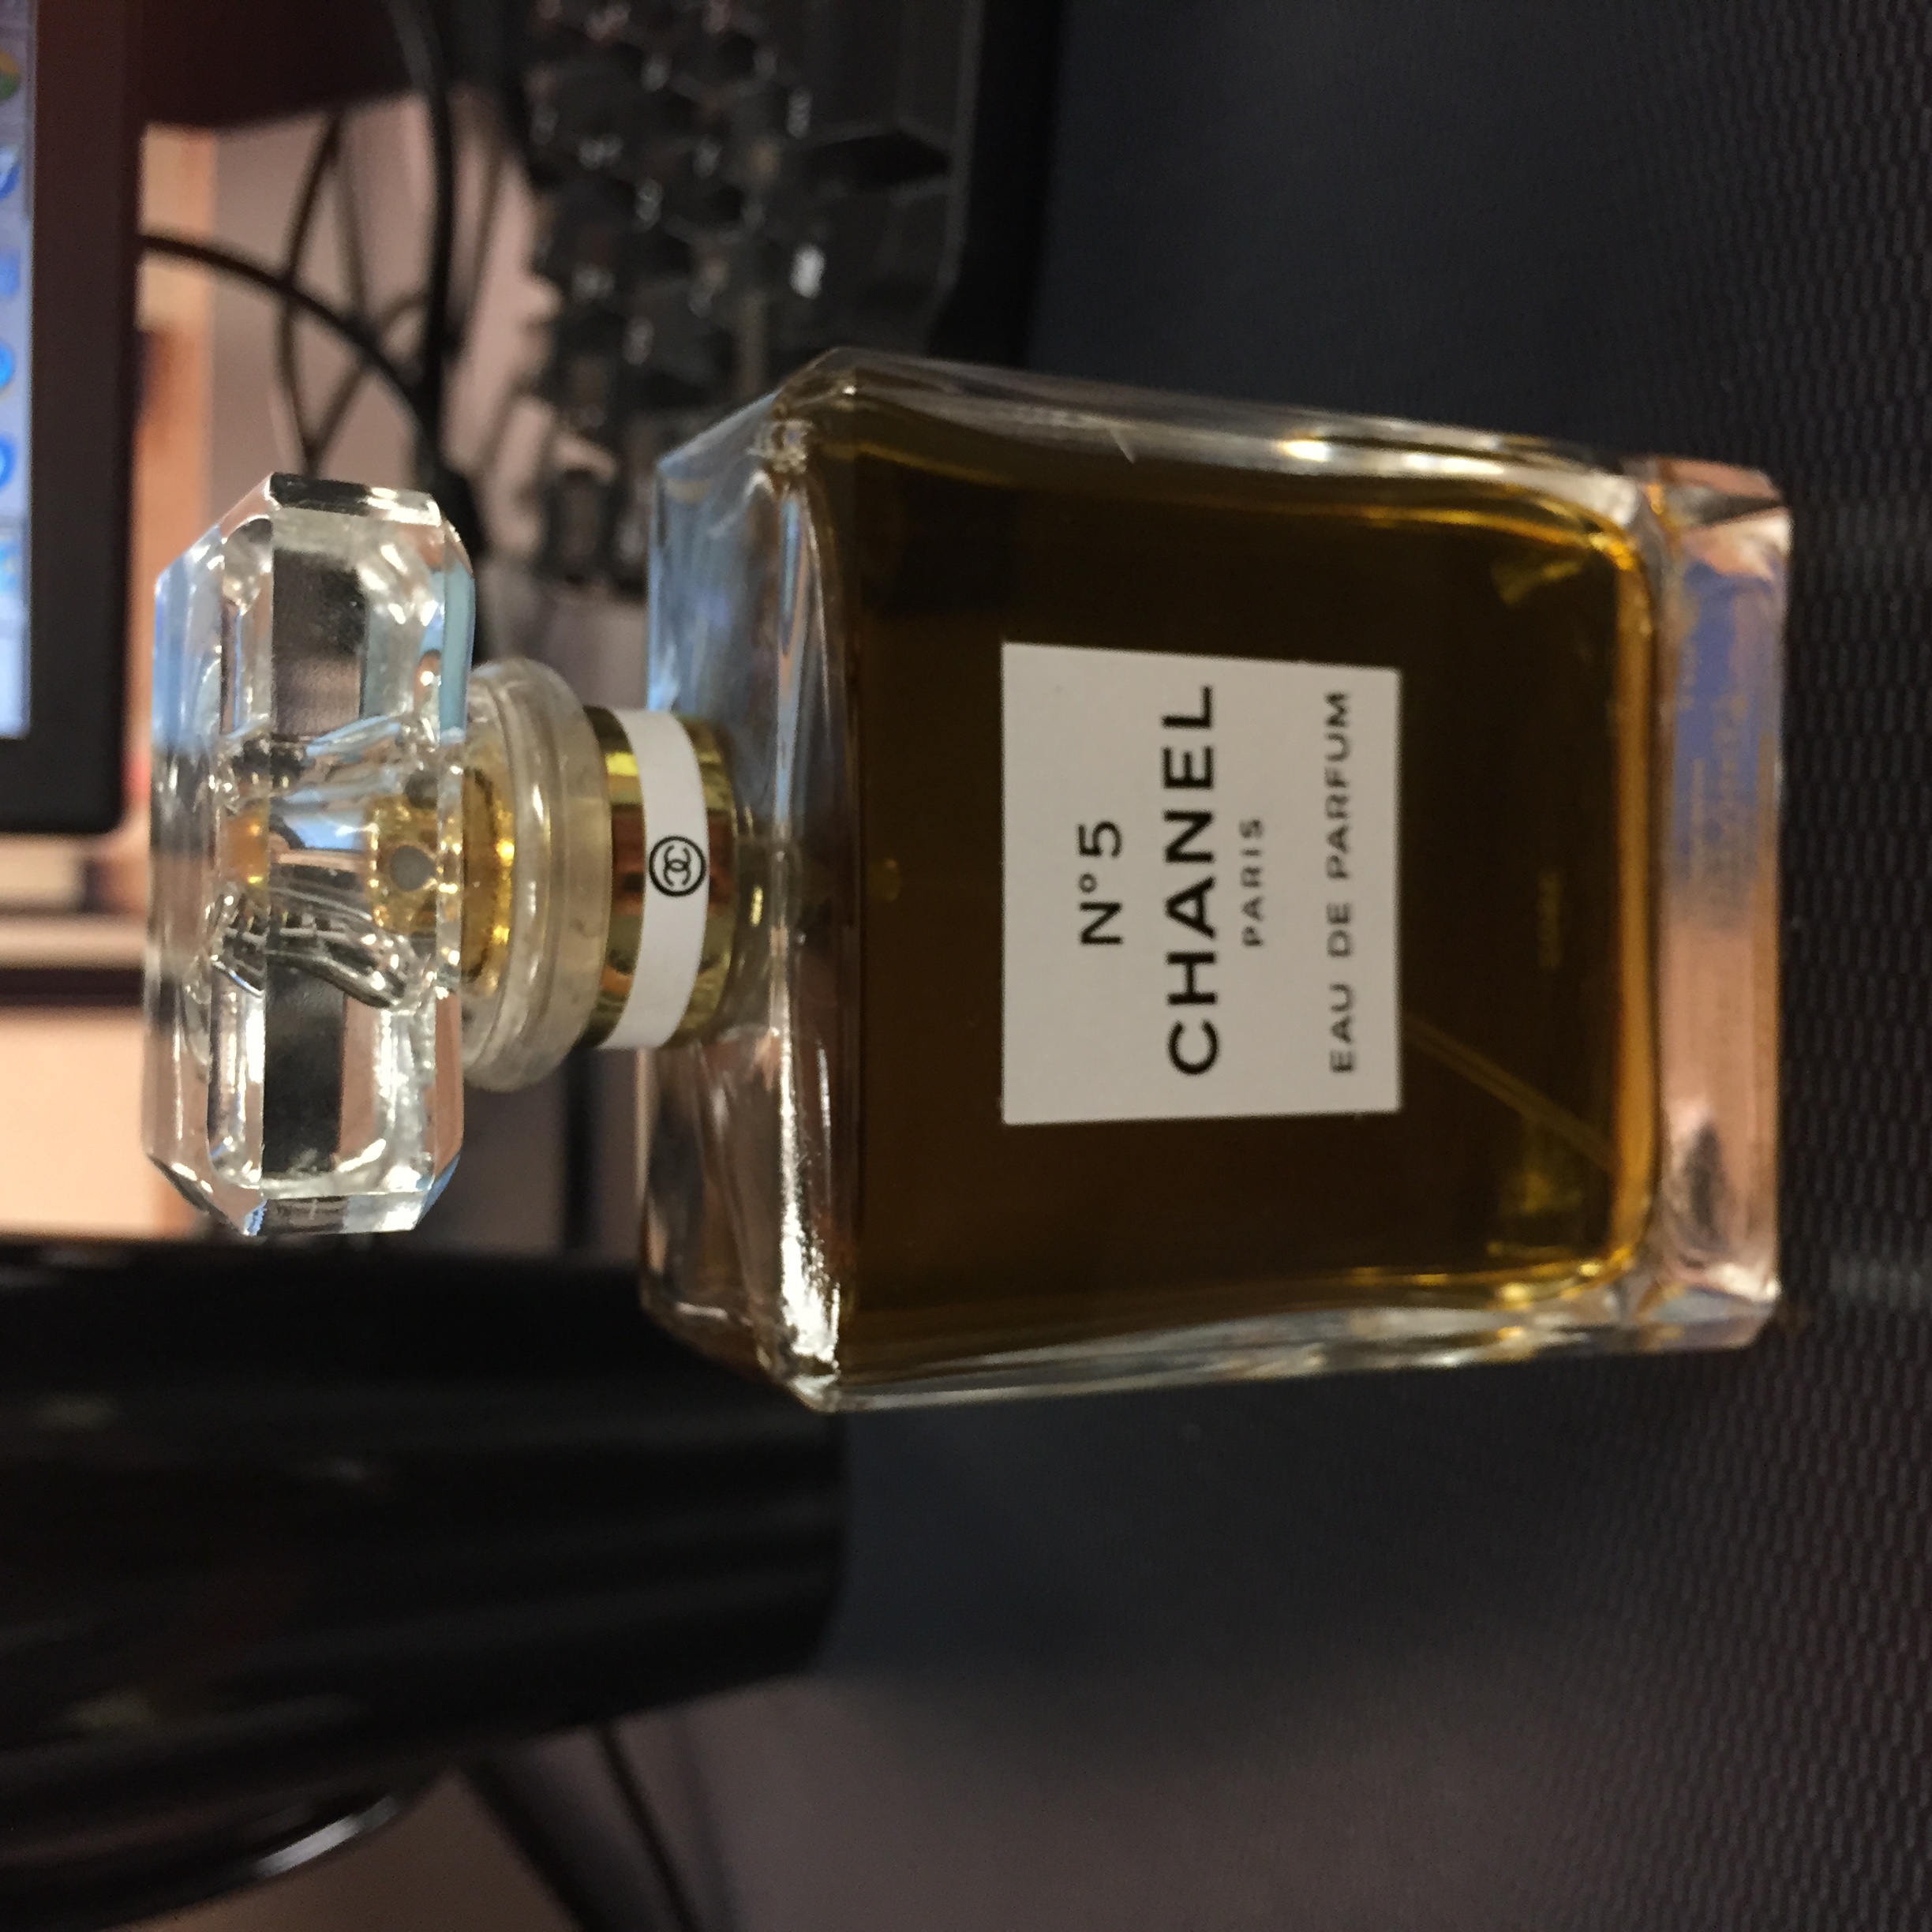 Chanel No.5 EDP authentication (color, light, smell, scent) - Fashion and  Beauty -clothes, shoes, hair care, skin care, makeup, designers -  City-Data Forum